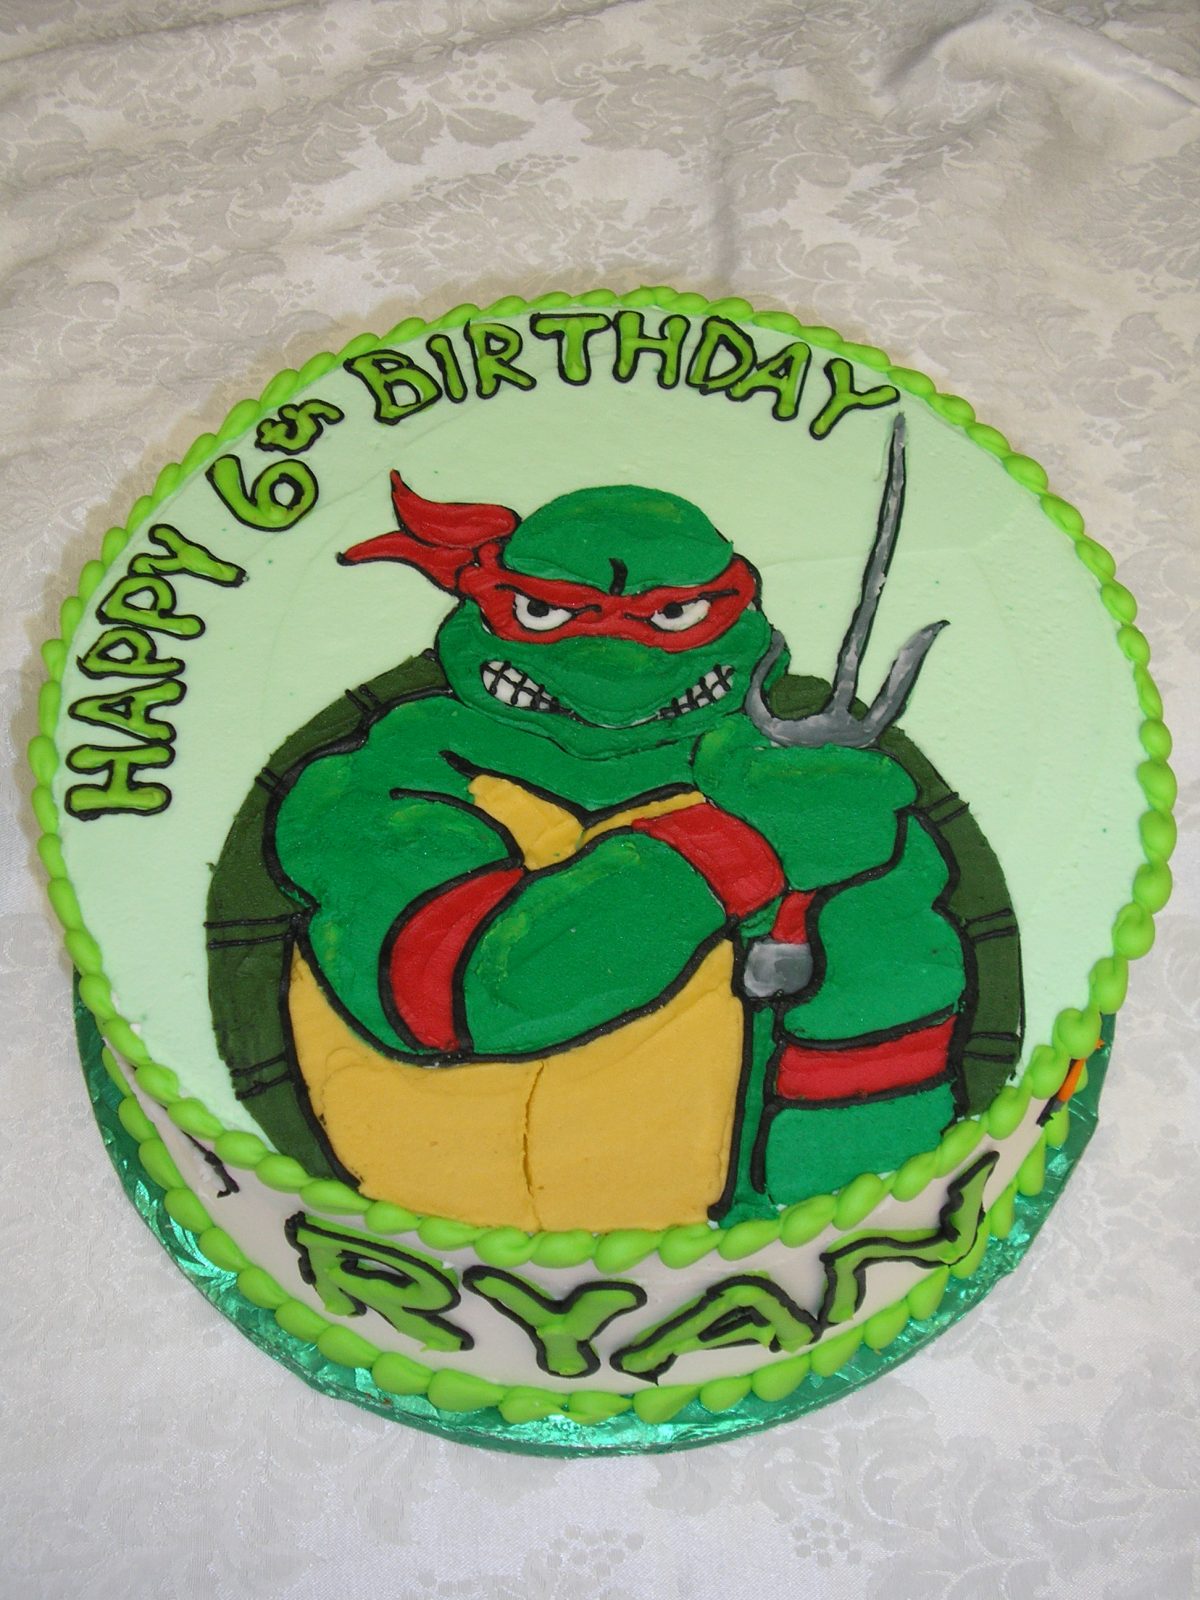 icing drawing of a ninja turtle on a cake